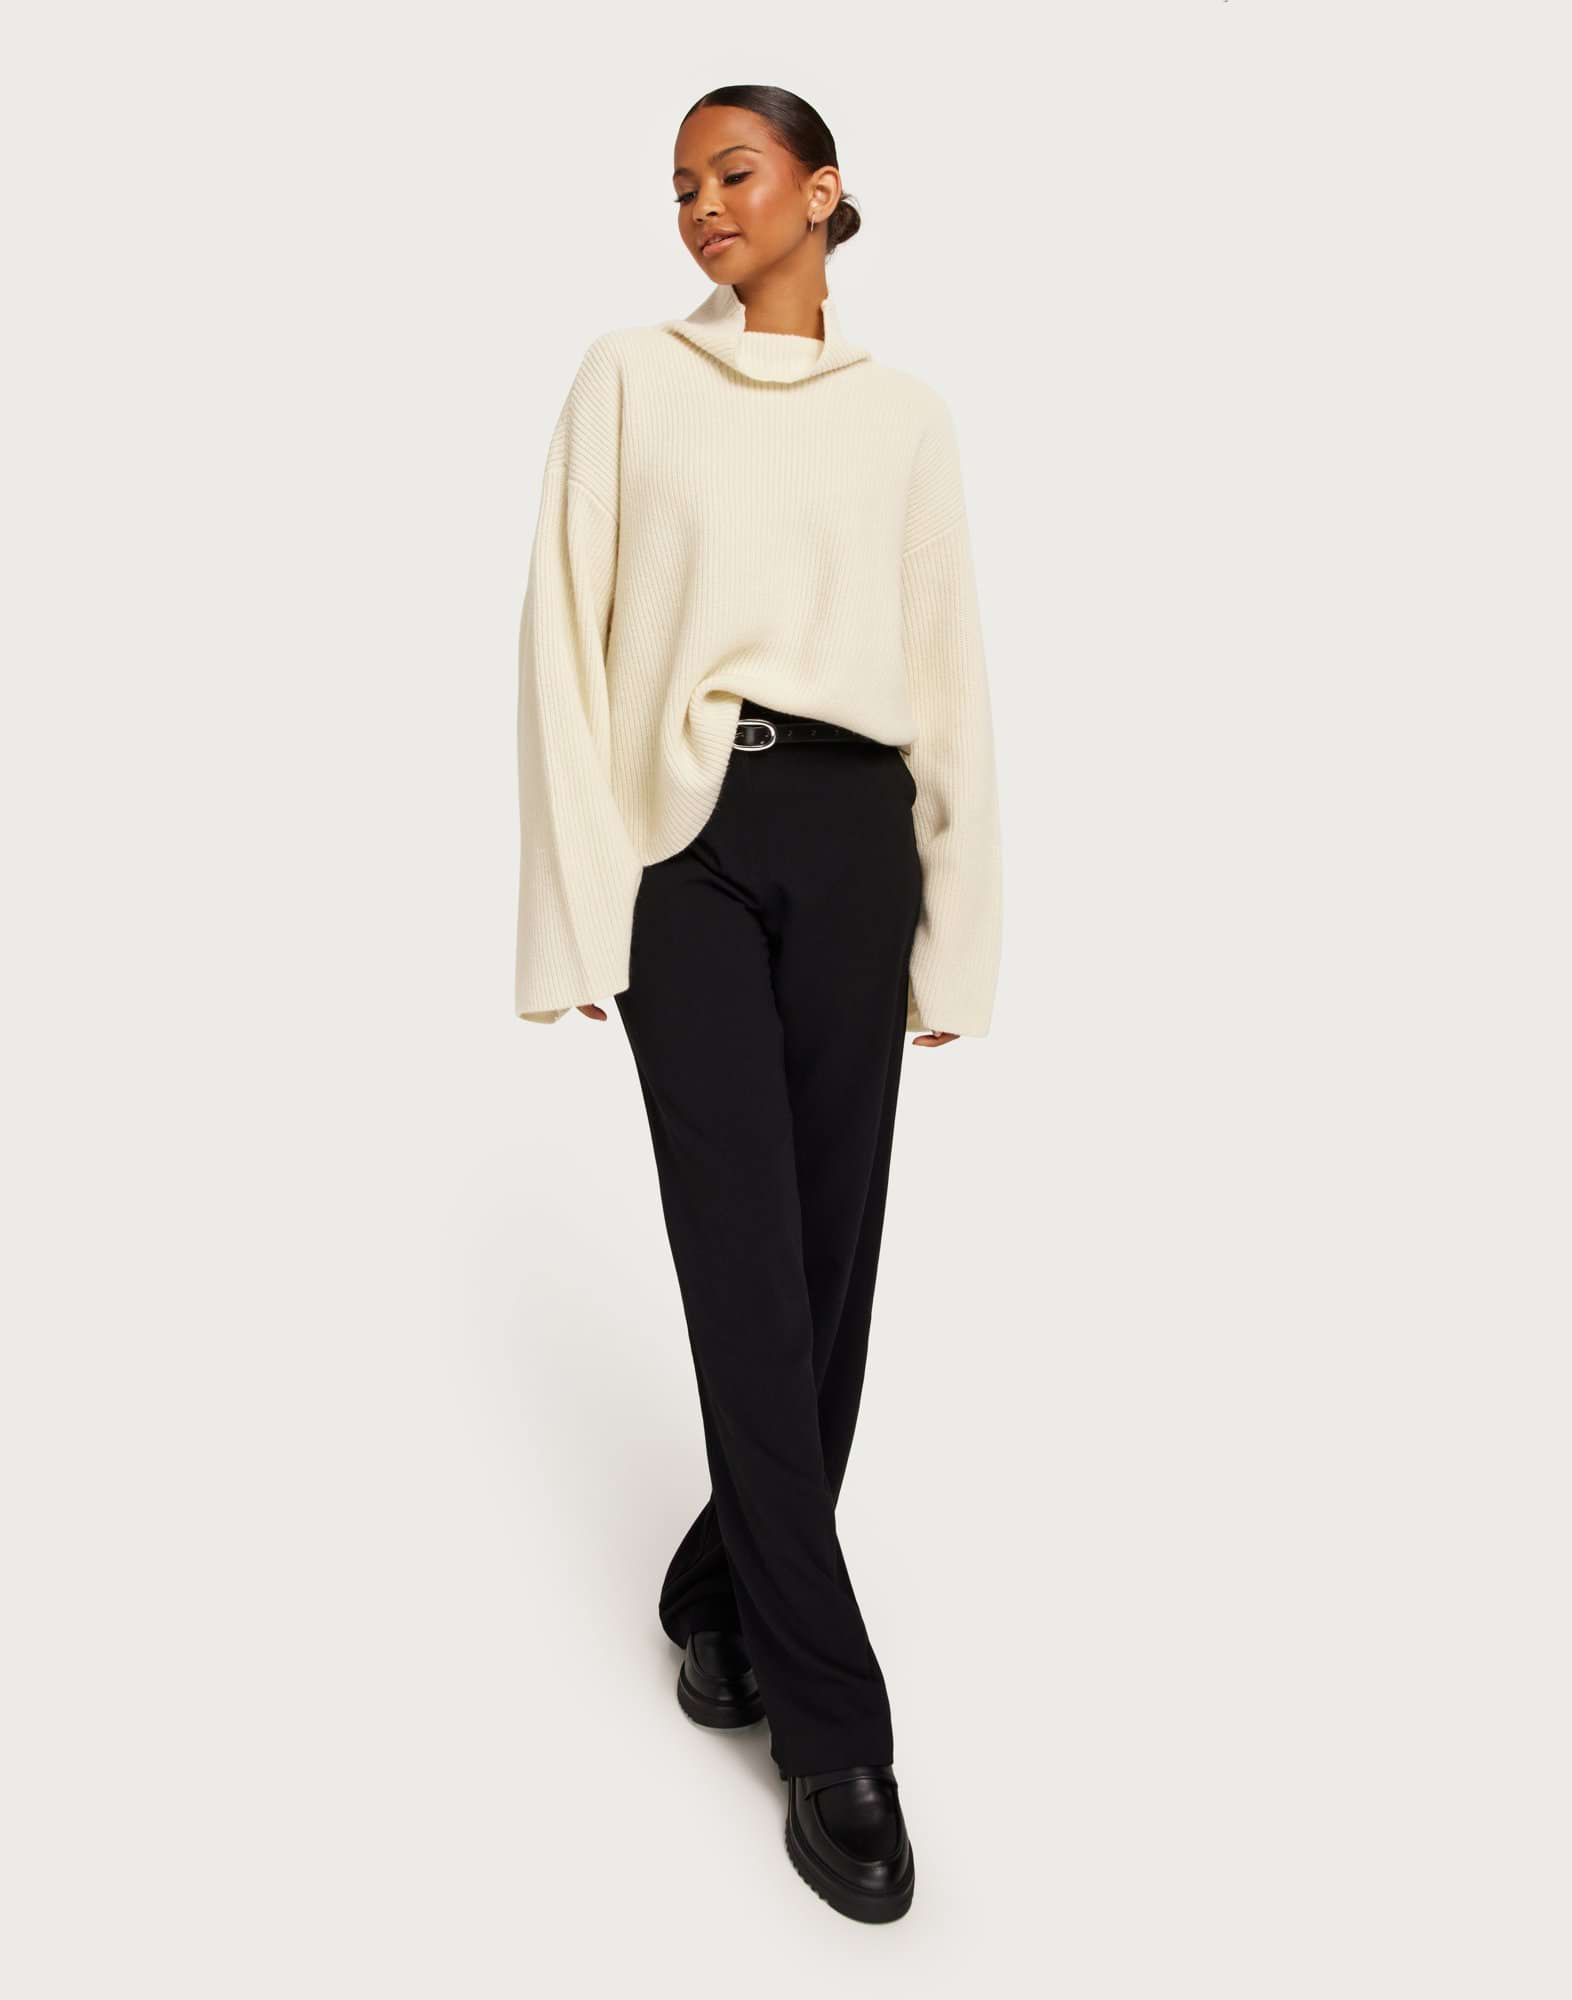 RisaneGZ high neck wool pullover NOOS